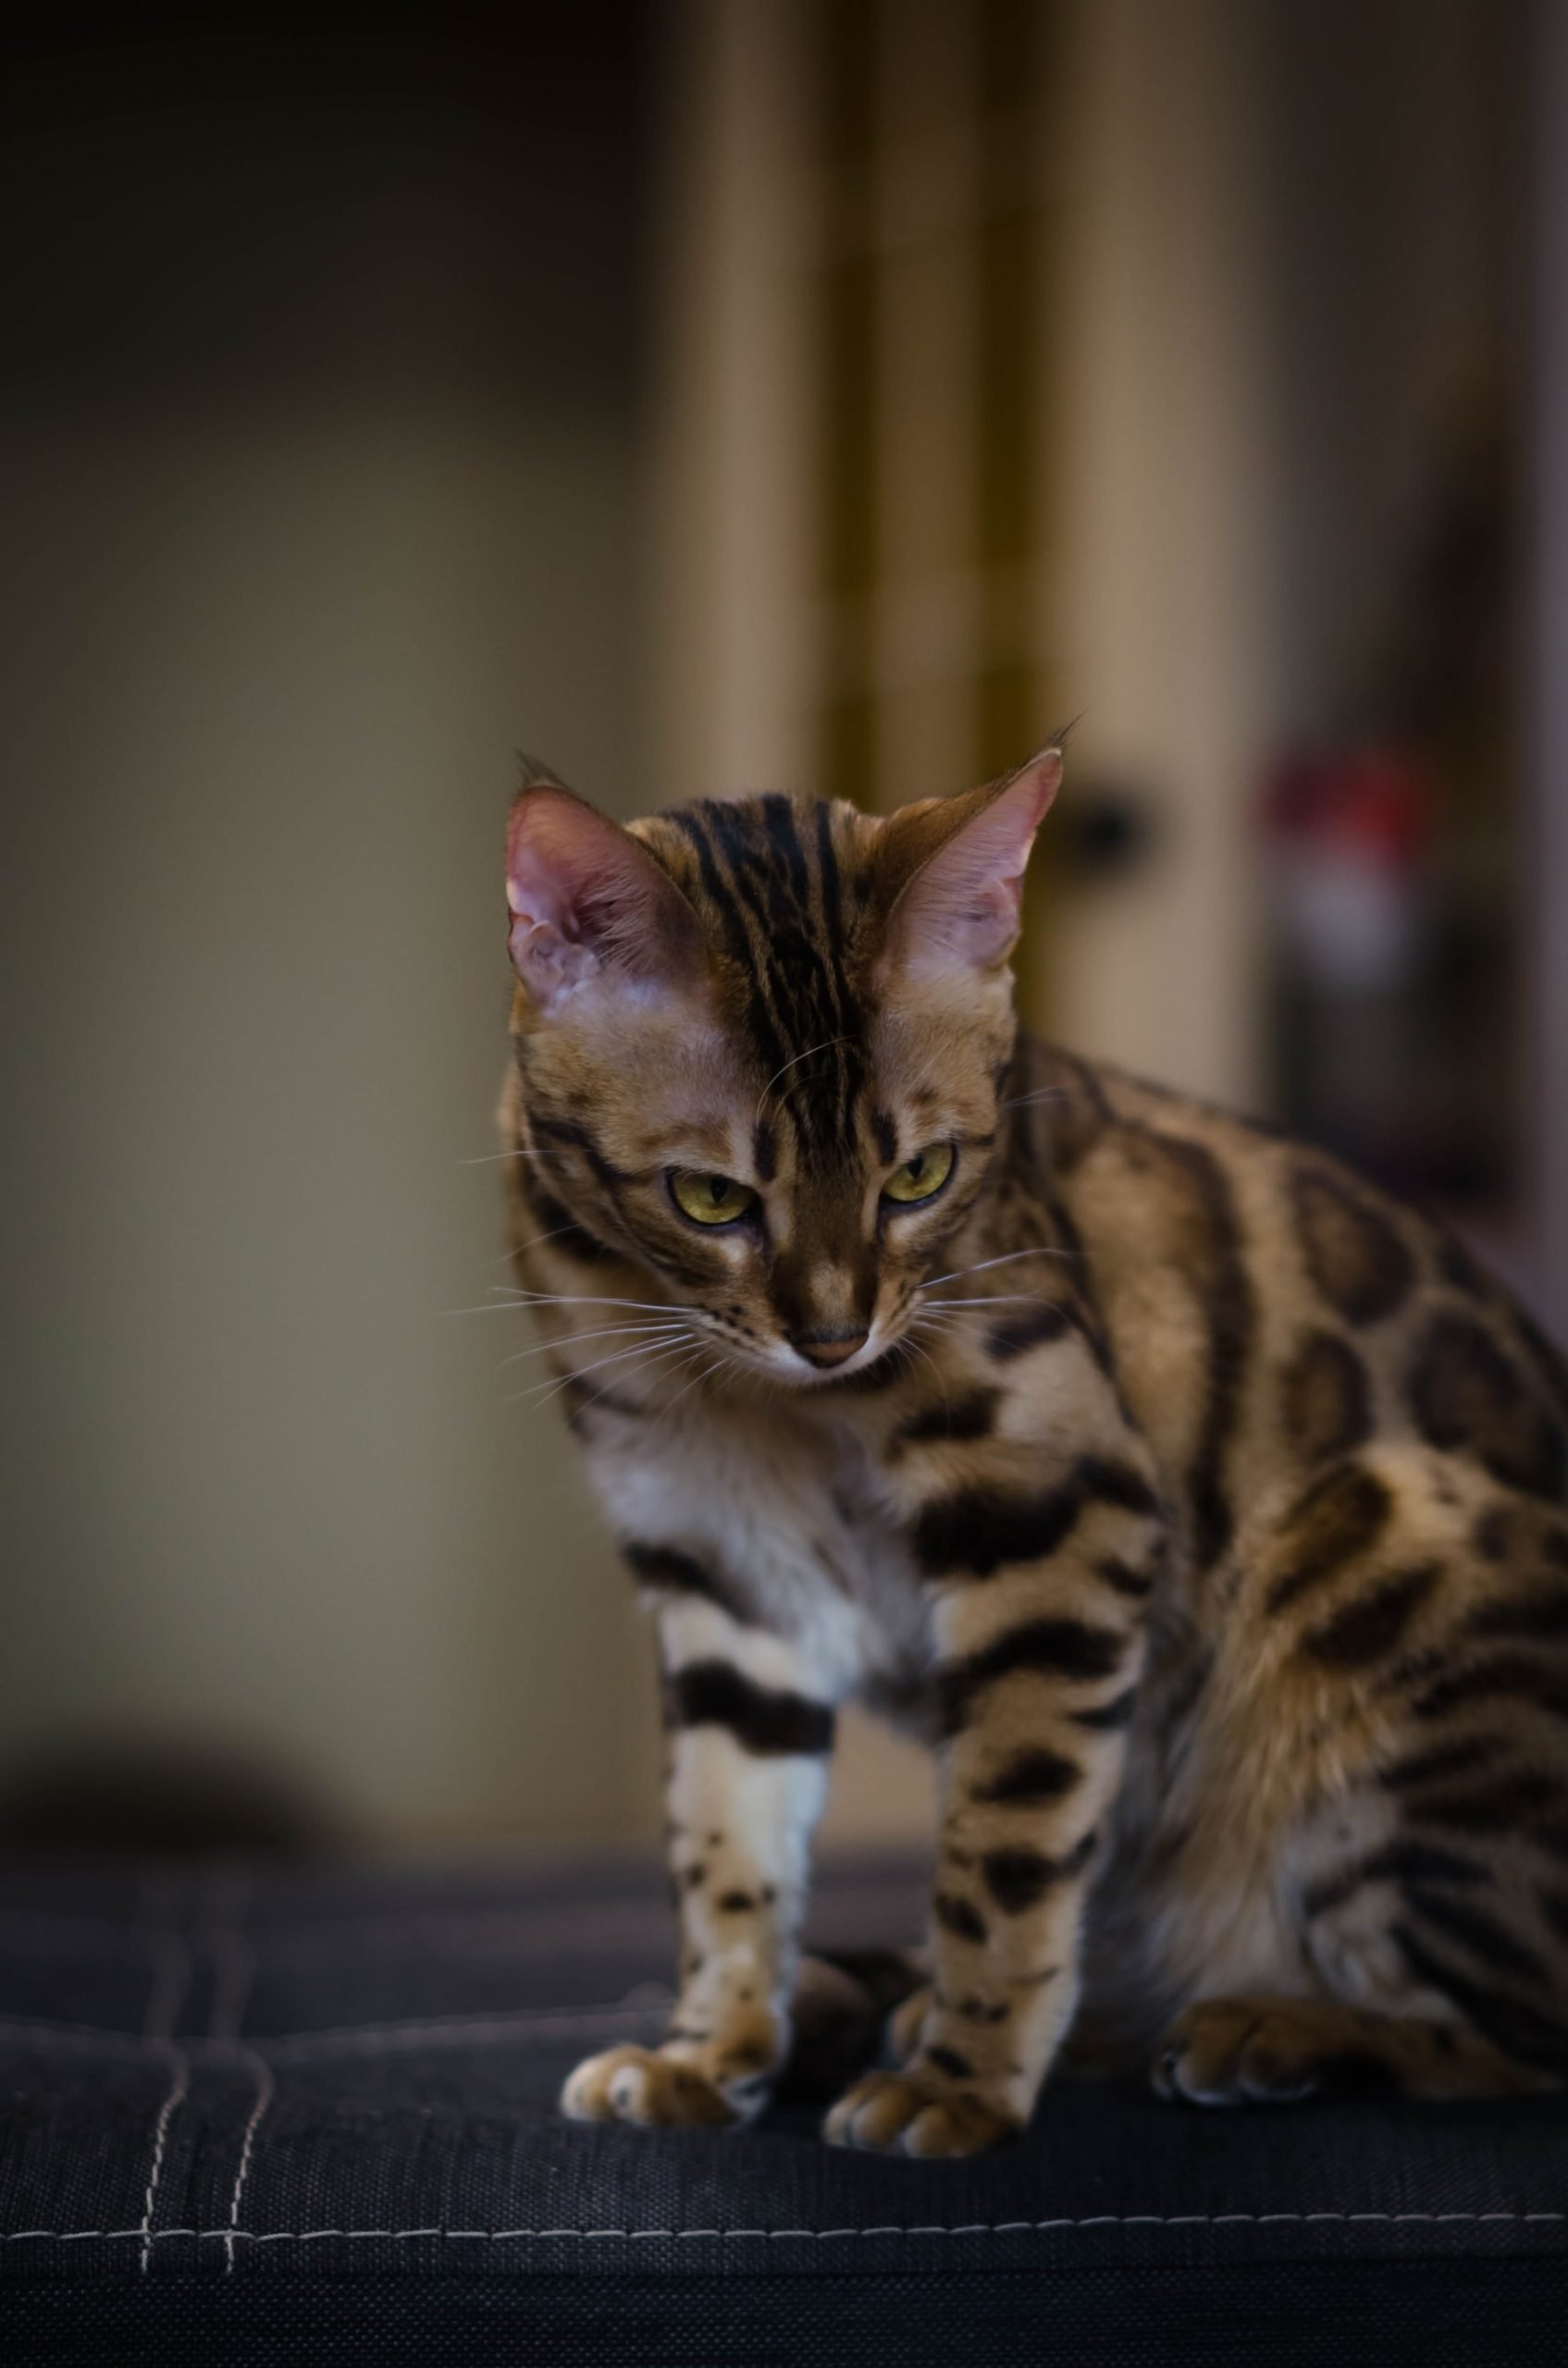 How to Train a Bengal Cat: 6 Excellent Tips